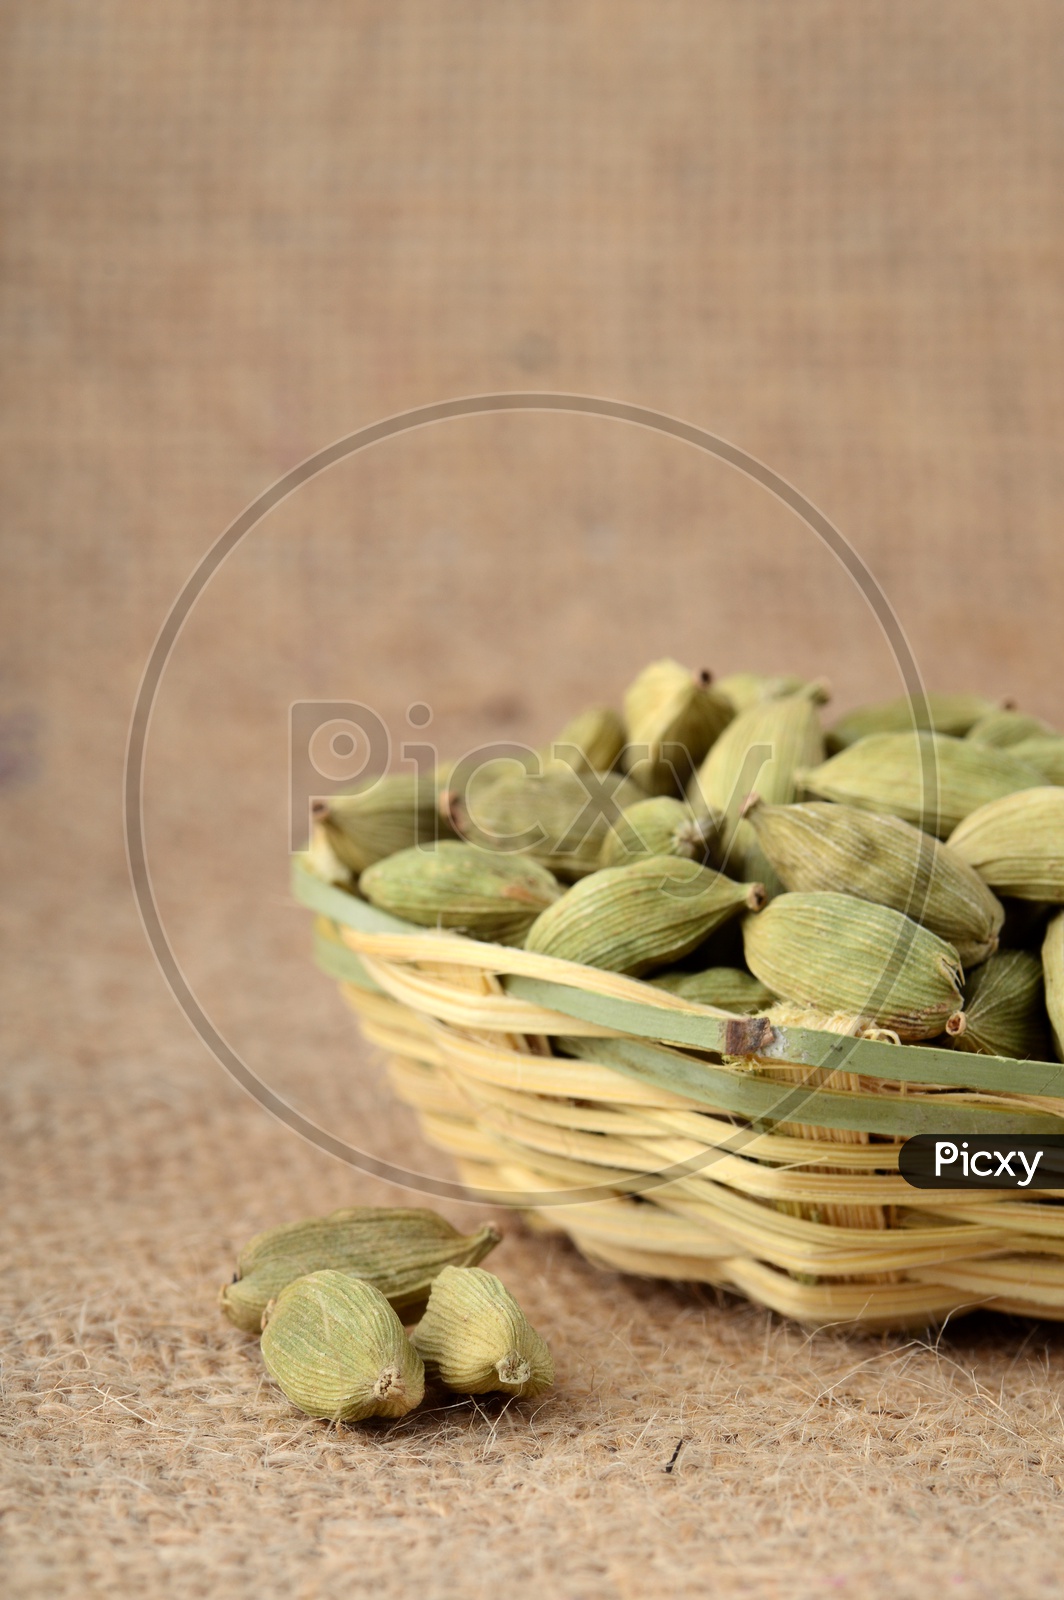 Green Cardamom pods in bamboo basket on sack cloth